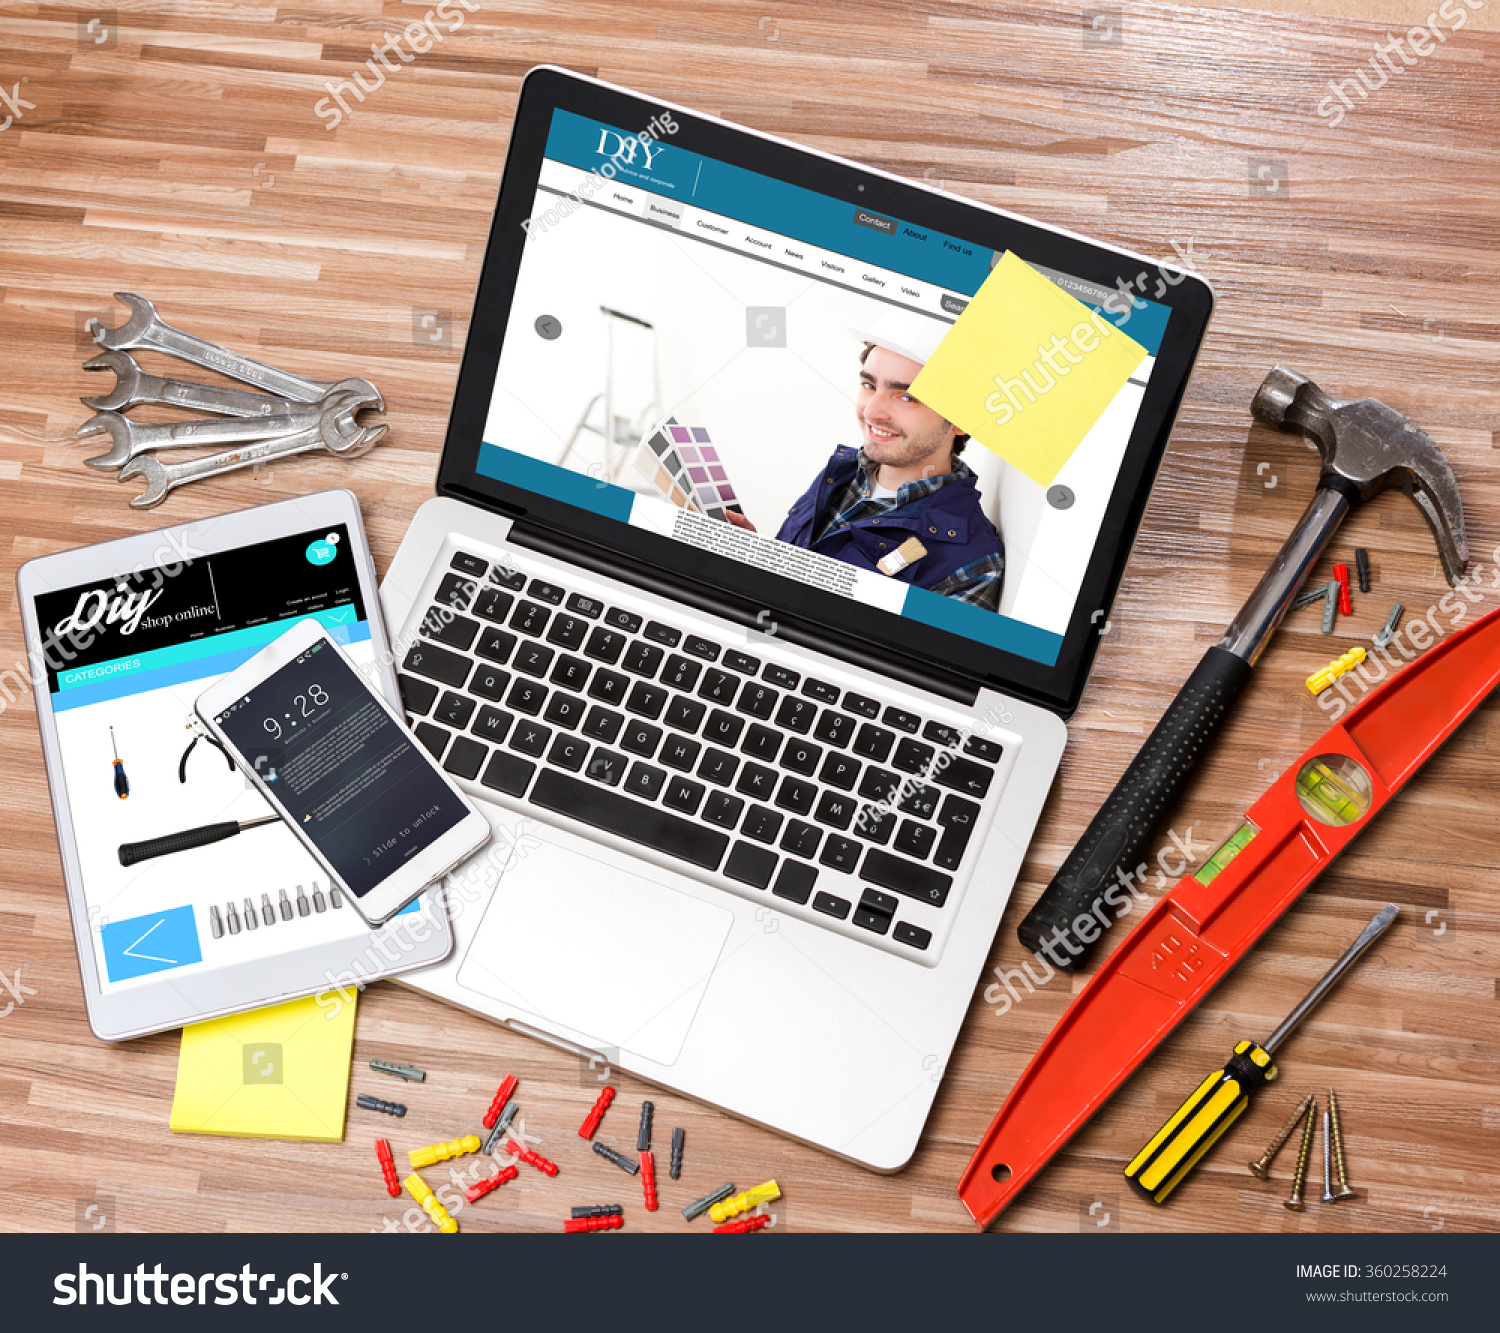 View of a Wood handyman's desk in high definition with laptop, tablet and mobile #360258224